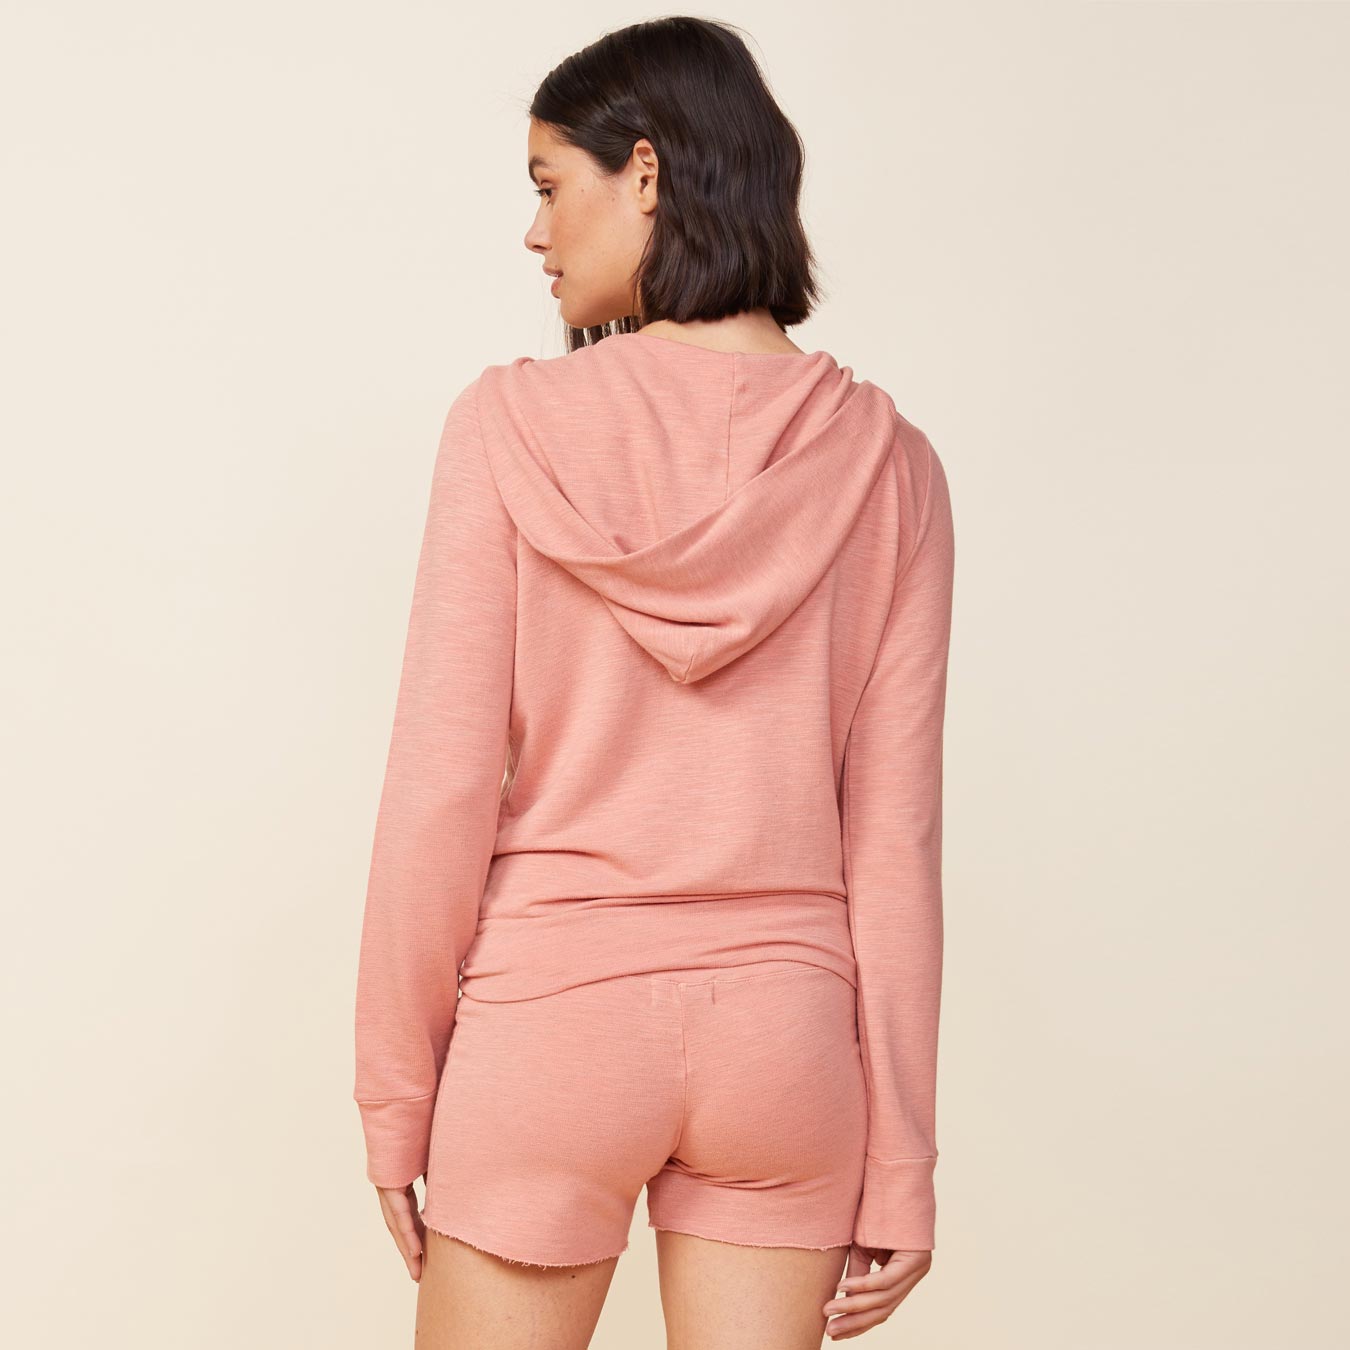 Back view of model wearing the supersoft zip up hoody in faded coral.